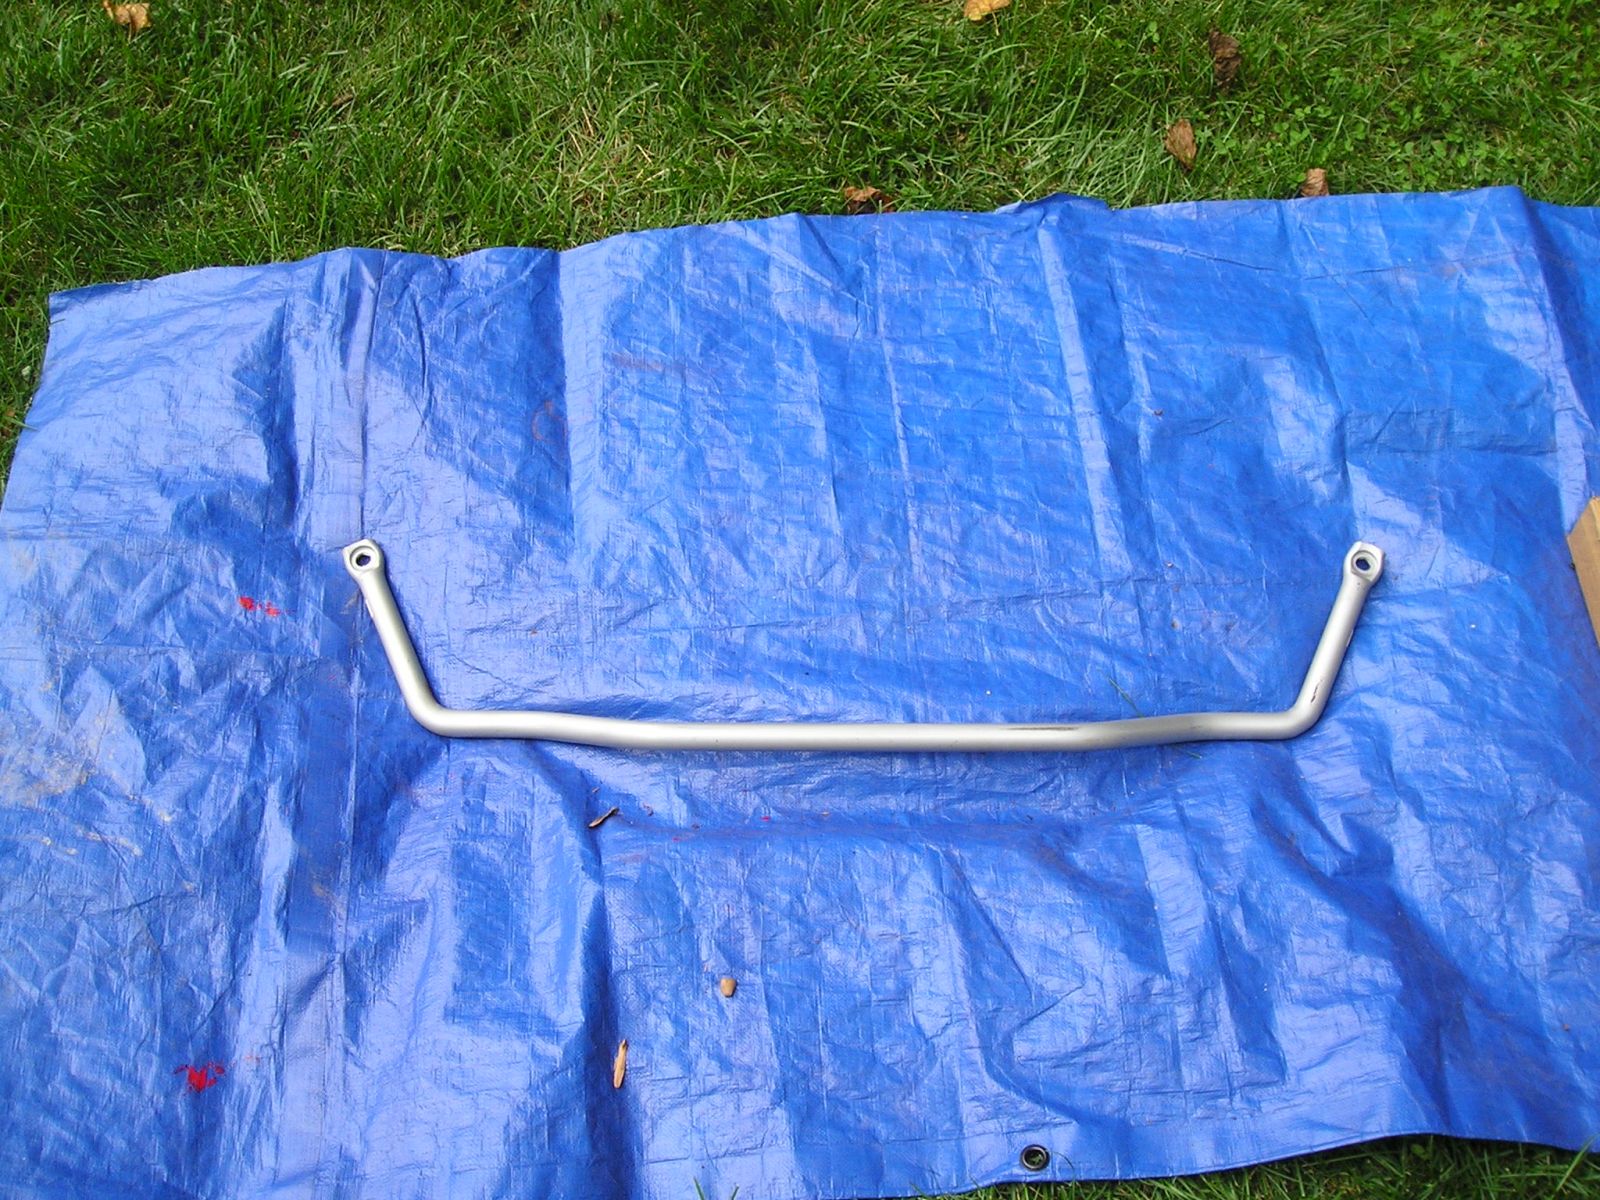 NOS Addco Front Sway Bar New in the Box